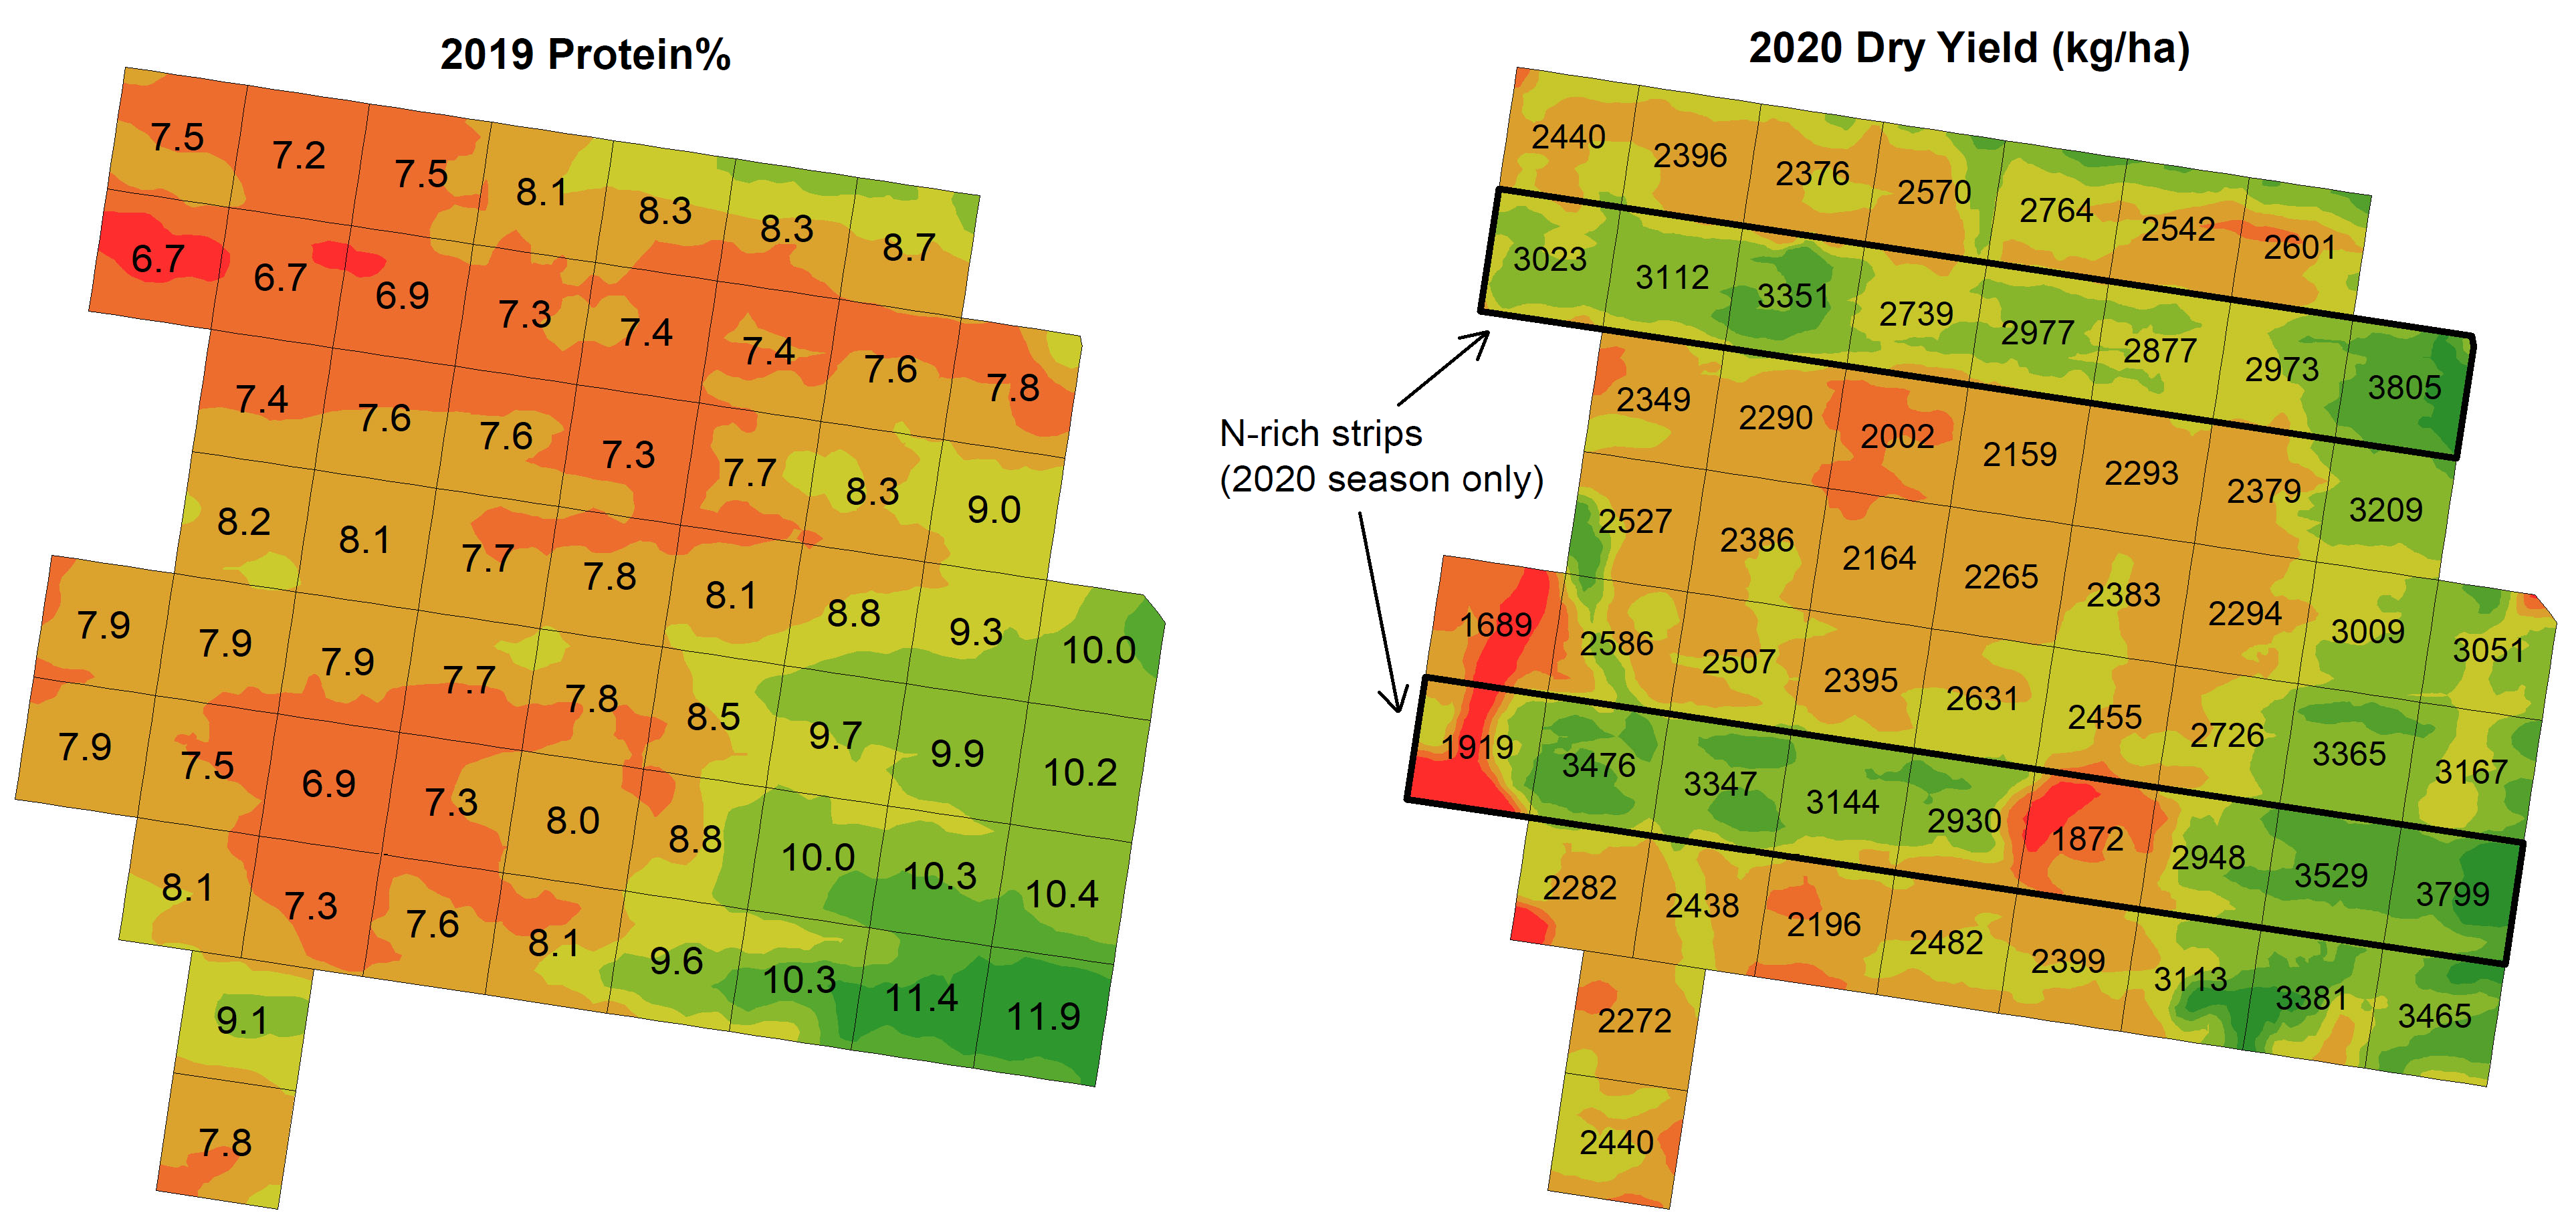 Figure 6 heat maps shwoing 2019 wheat (cv. Lancer ) grain protein (left) and 2020 wheat (cv. Spitfire ) dry yield at Ardlethan, with locations of N-rich strips shown. Note the greater yield response to additional N in areas of lower 2019 protein%.